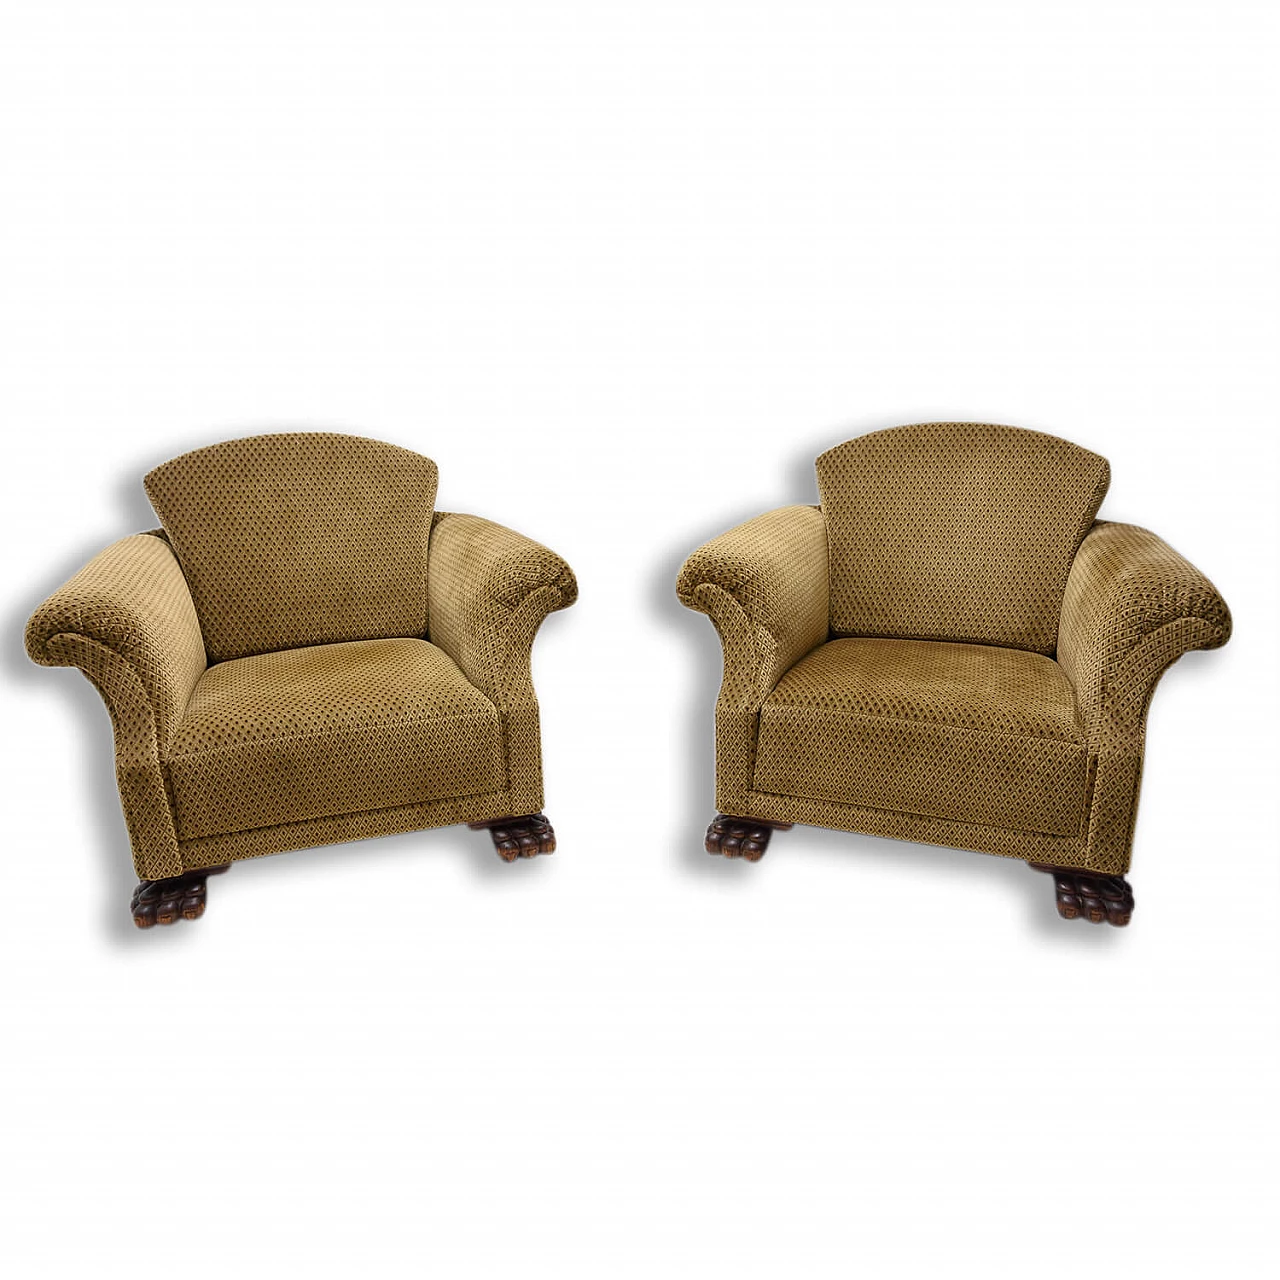 Pair of Art Deco armchairs with lion feet, 1930s 1352086